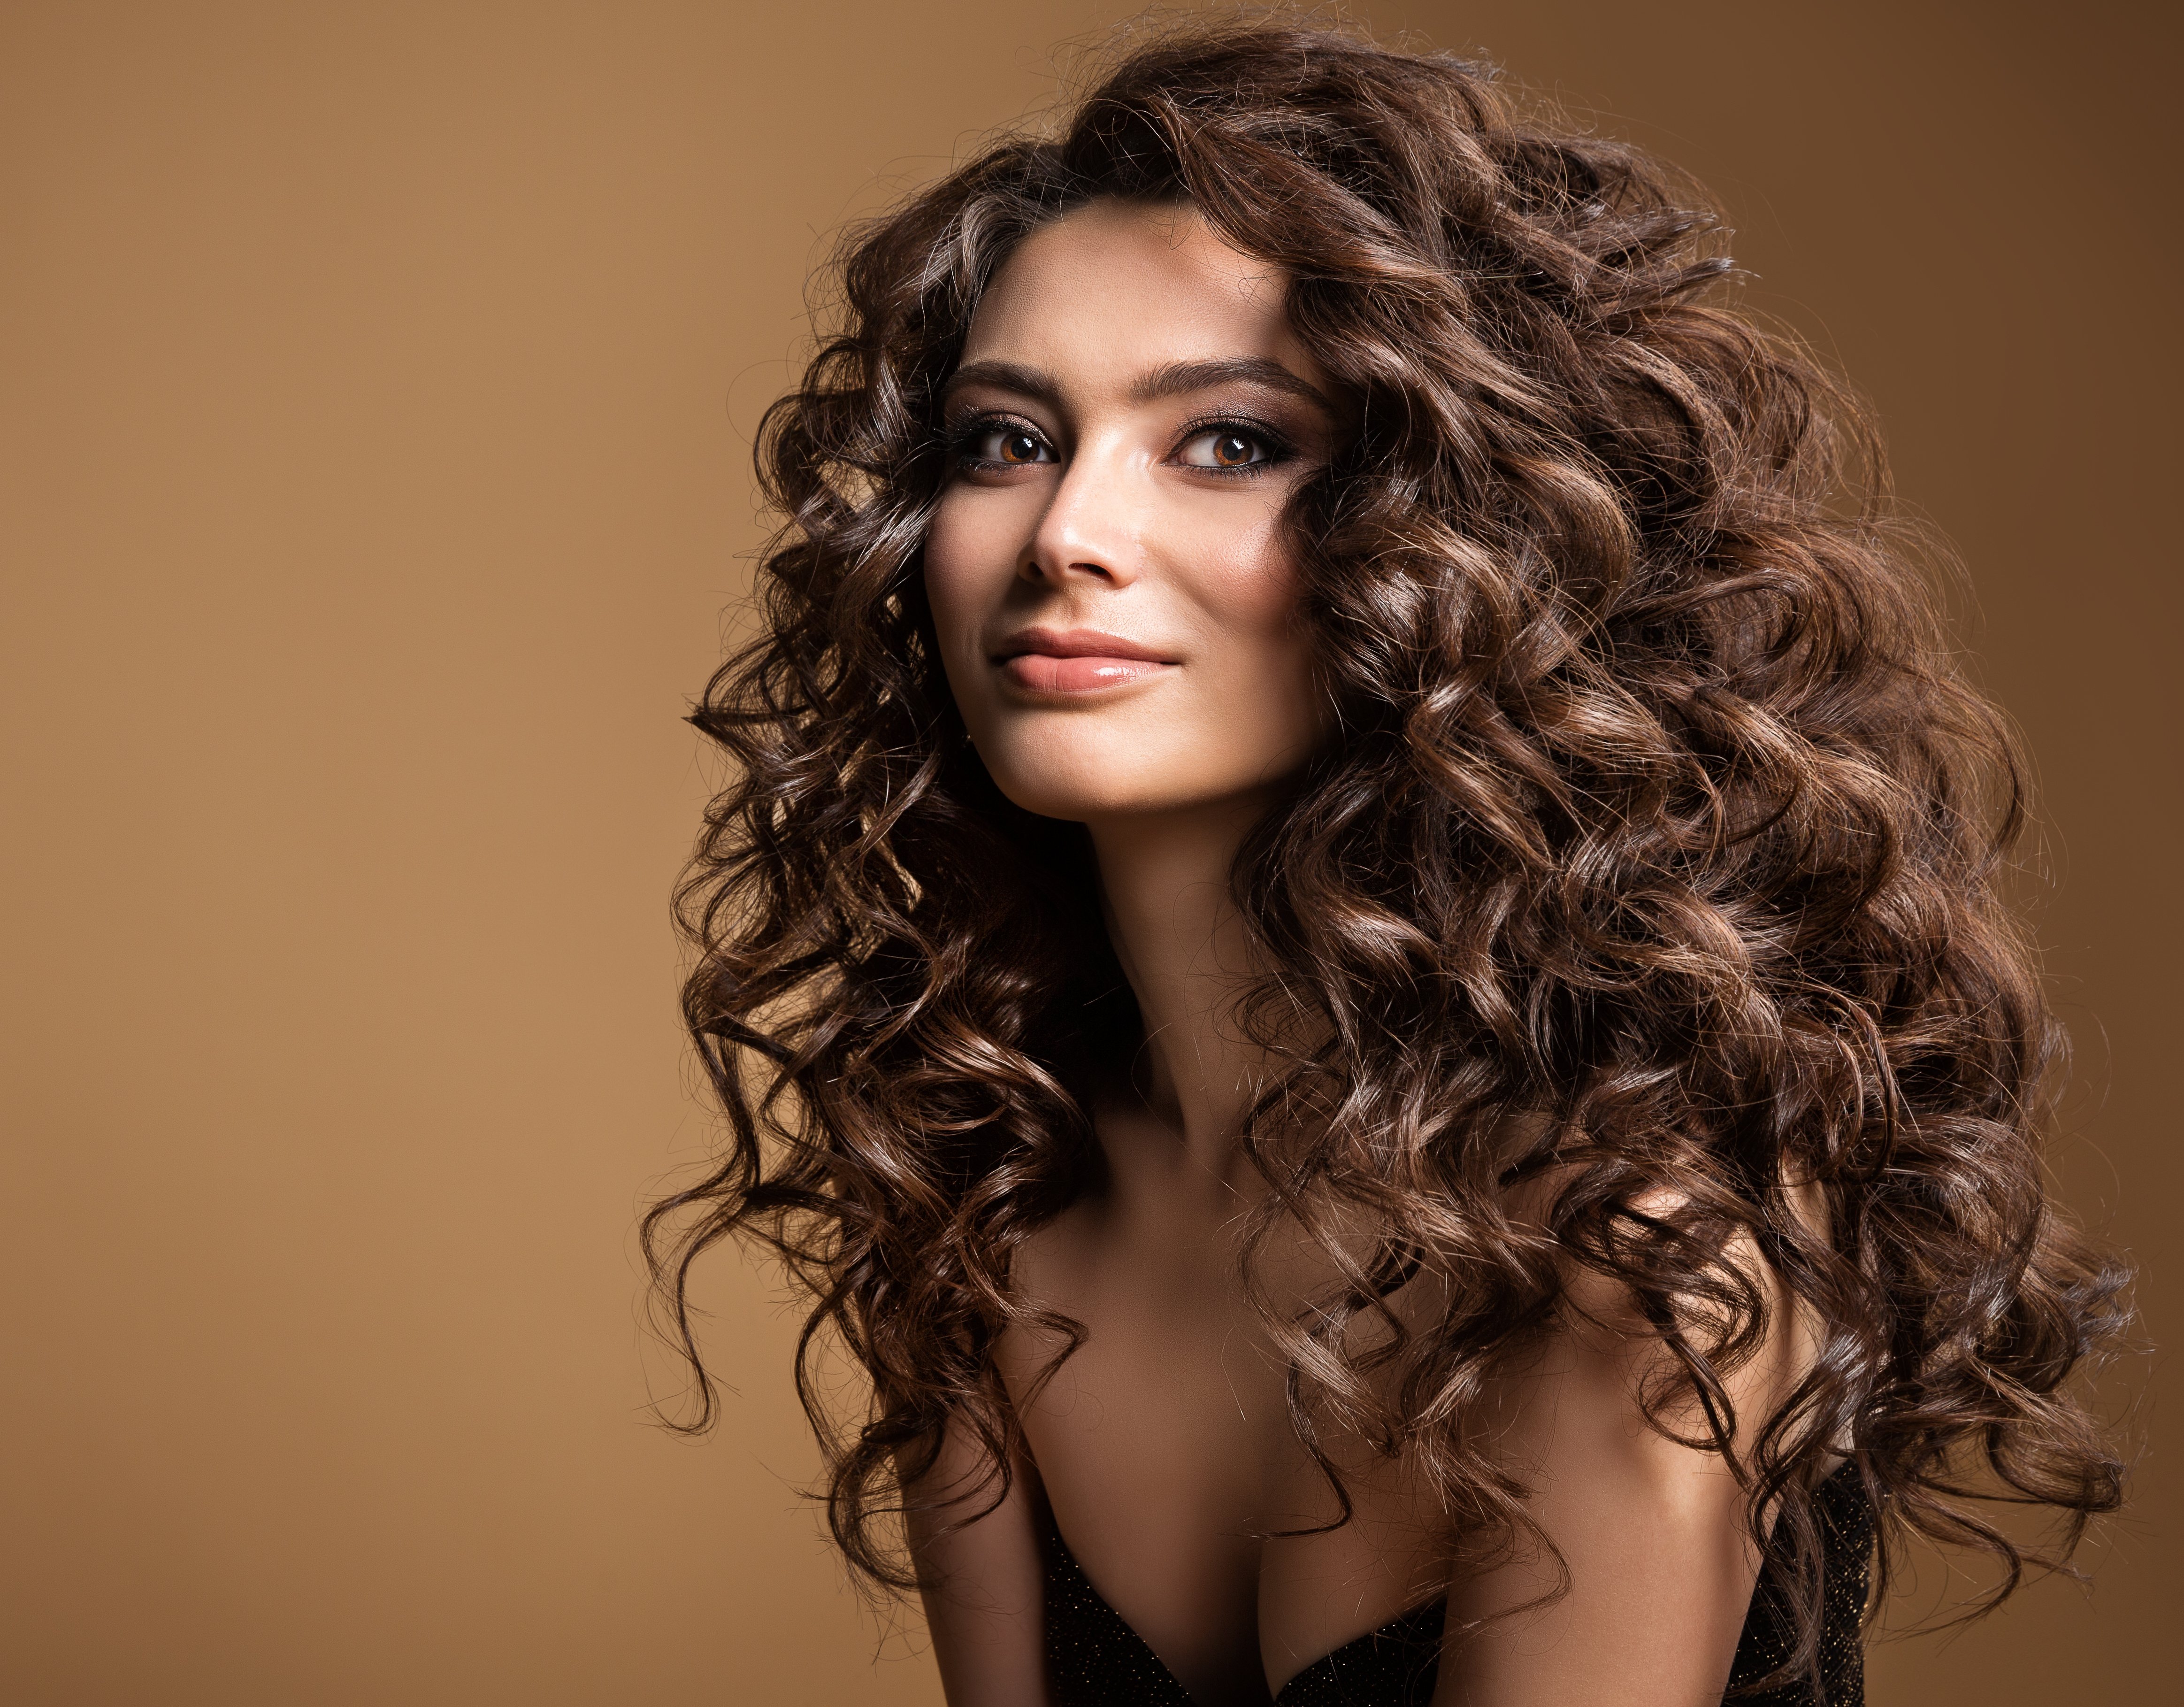 Woman with curly hair. | Source: Getty Images